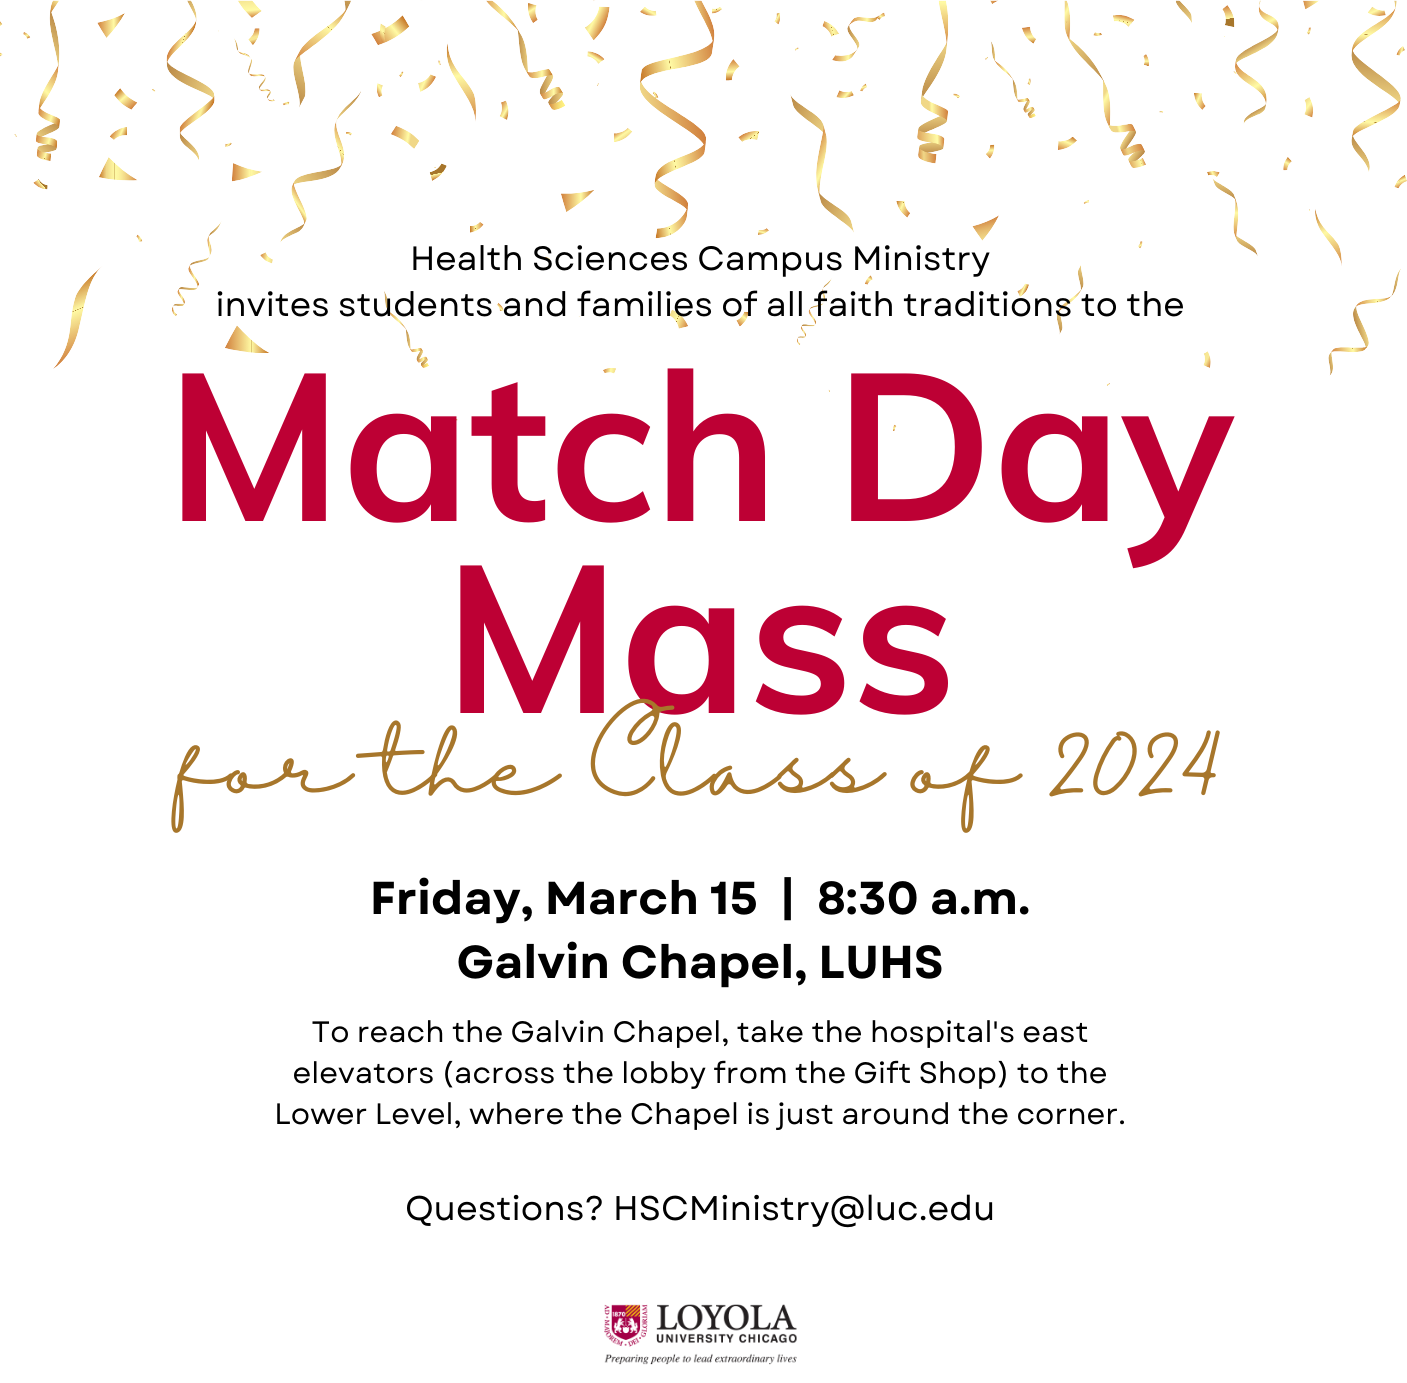 Flier for HSC Ministry's Match Day Mass on Friday, March 15, 2024, at 8:30am in the Galvin Chapel, LUHS Lower Level.